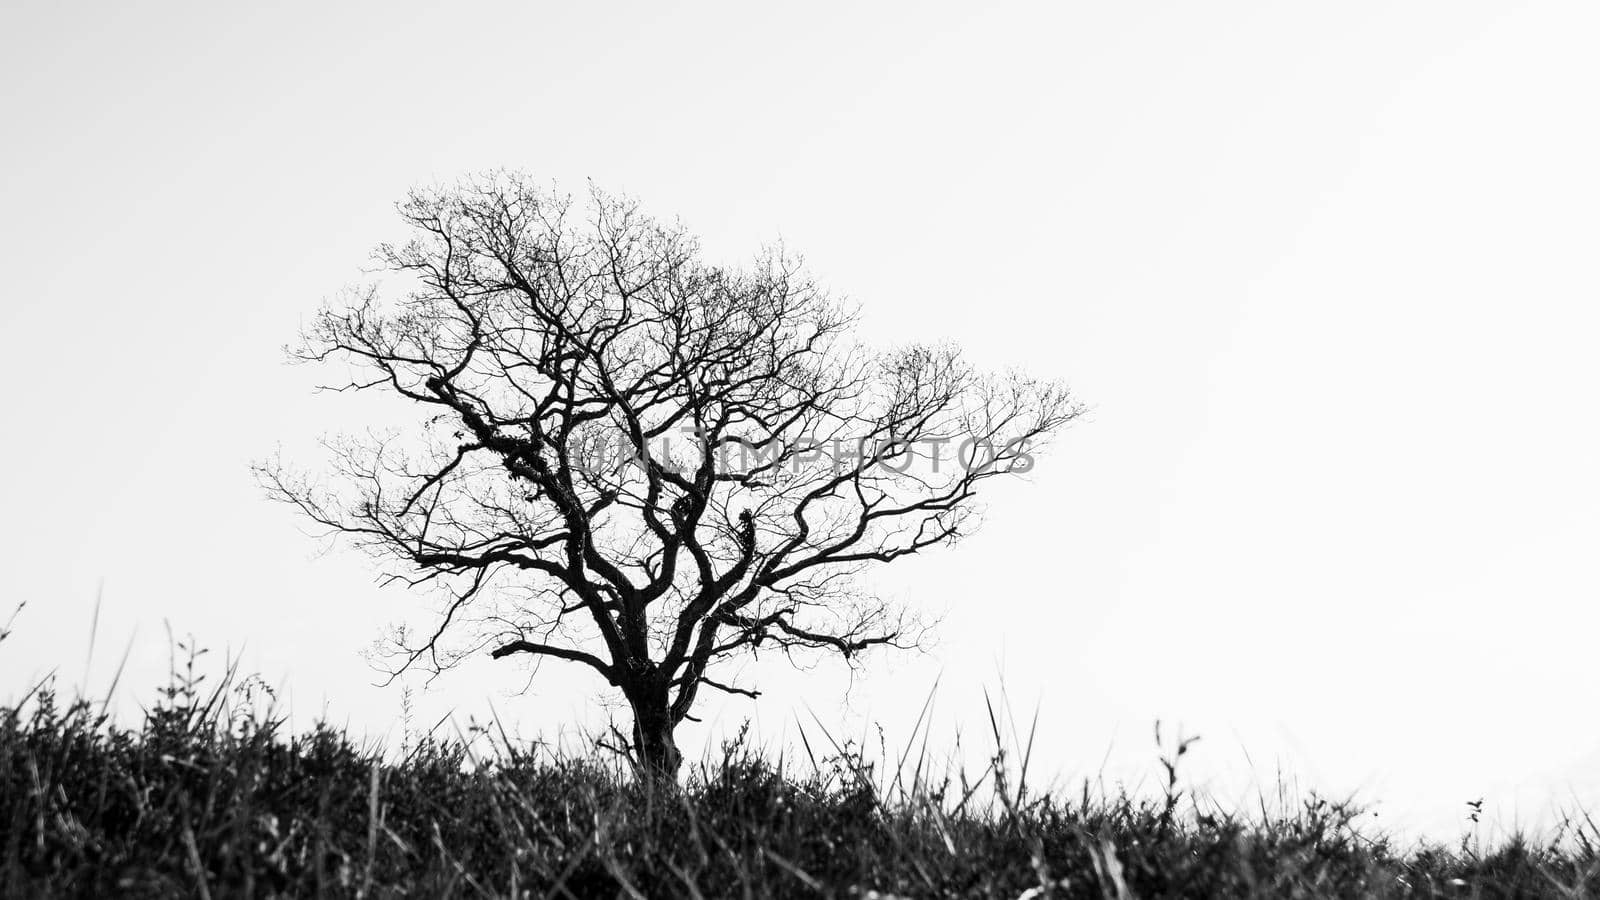 Silhouette of a single leafless tree in winter season, dark trunk and branches against sunny bright sky, black and white photography